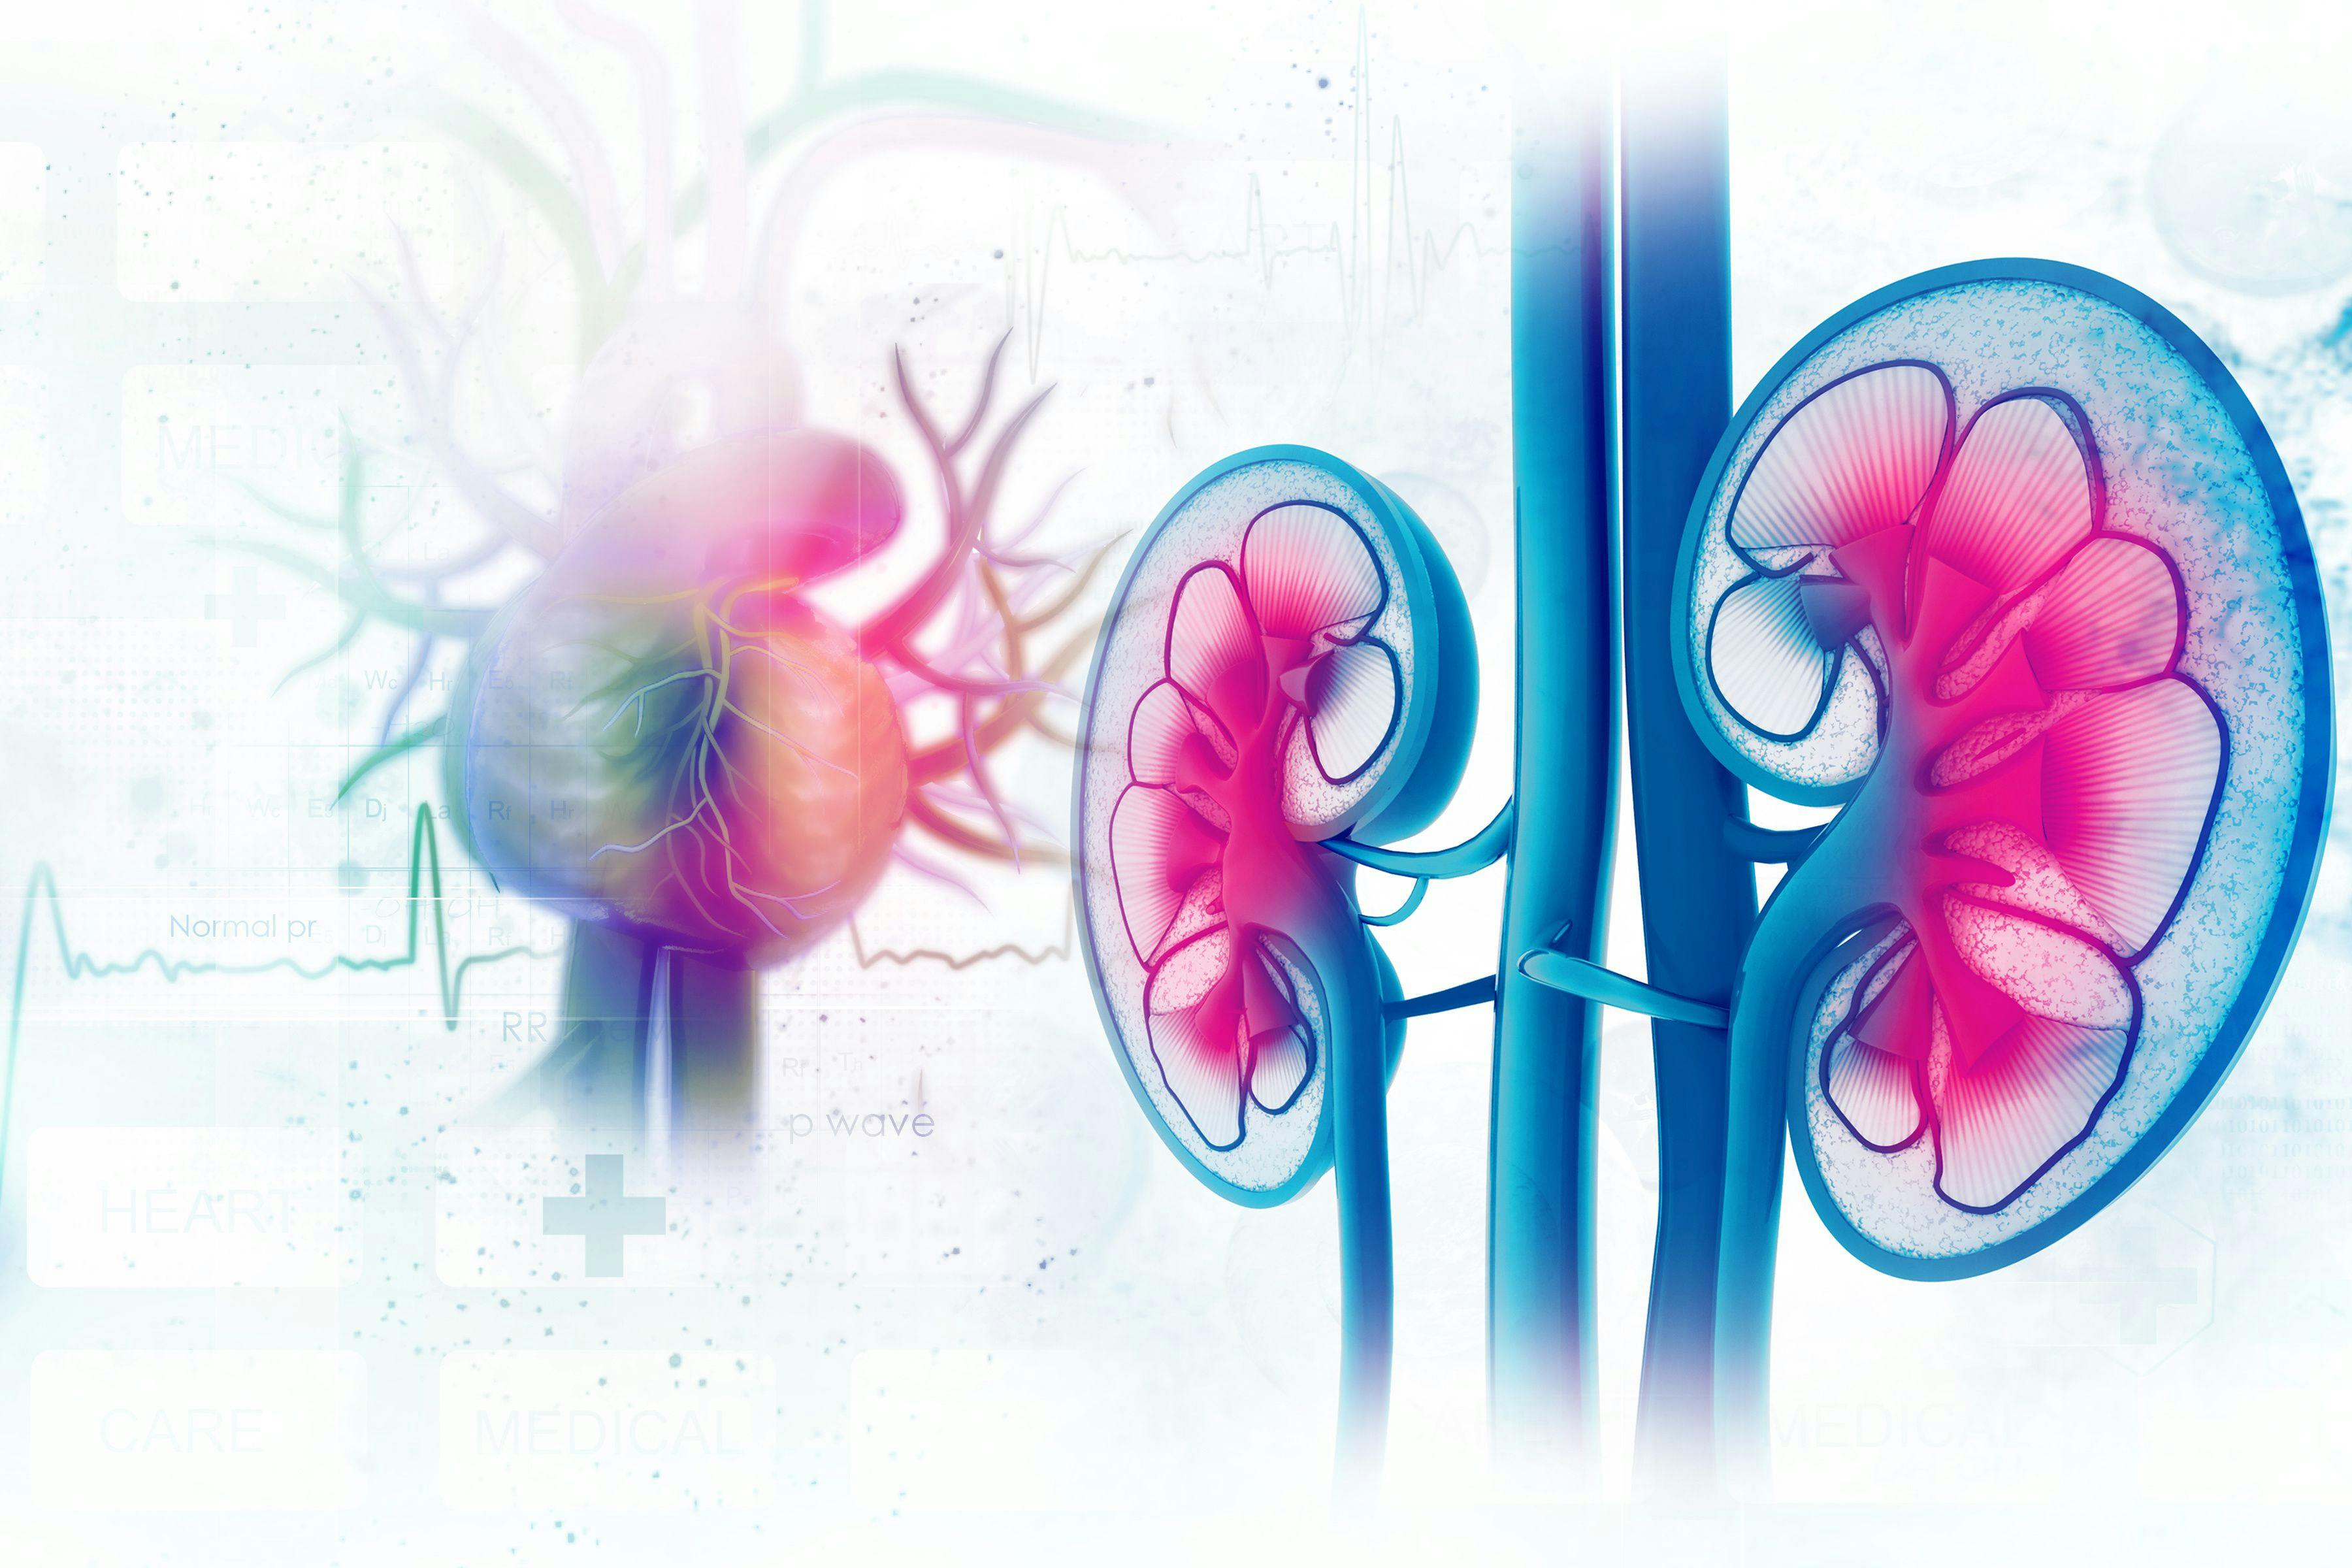 Research from the 2021 International Kidney Cancer Symposium North America identified prognostic value in cell cycle proliferation and epithelial-mesenchymal transition pathway scores in clear cell renal cell carcinoma in predicting survival and recurrence.